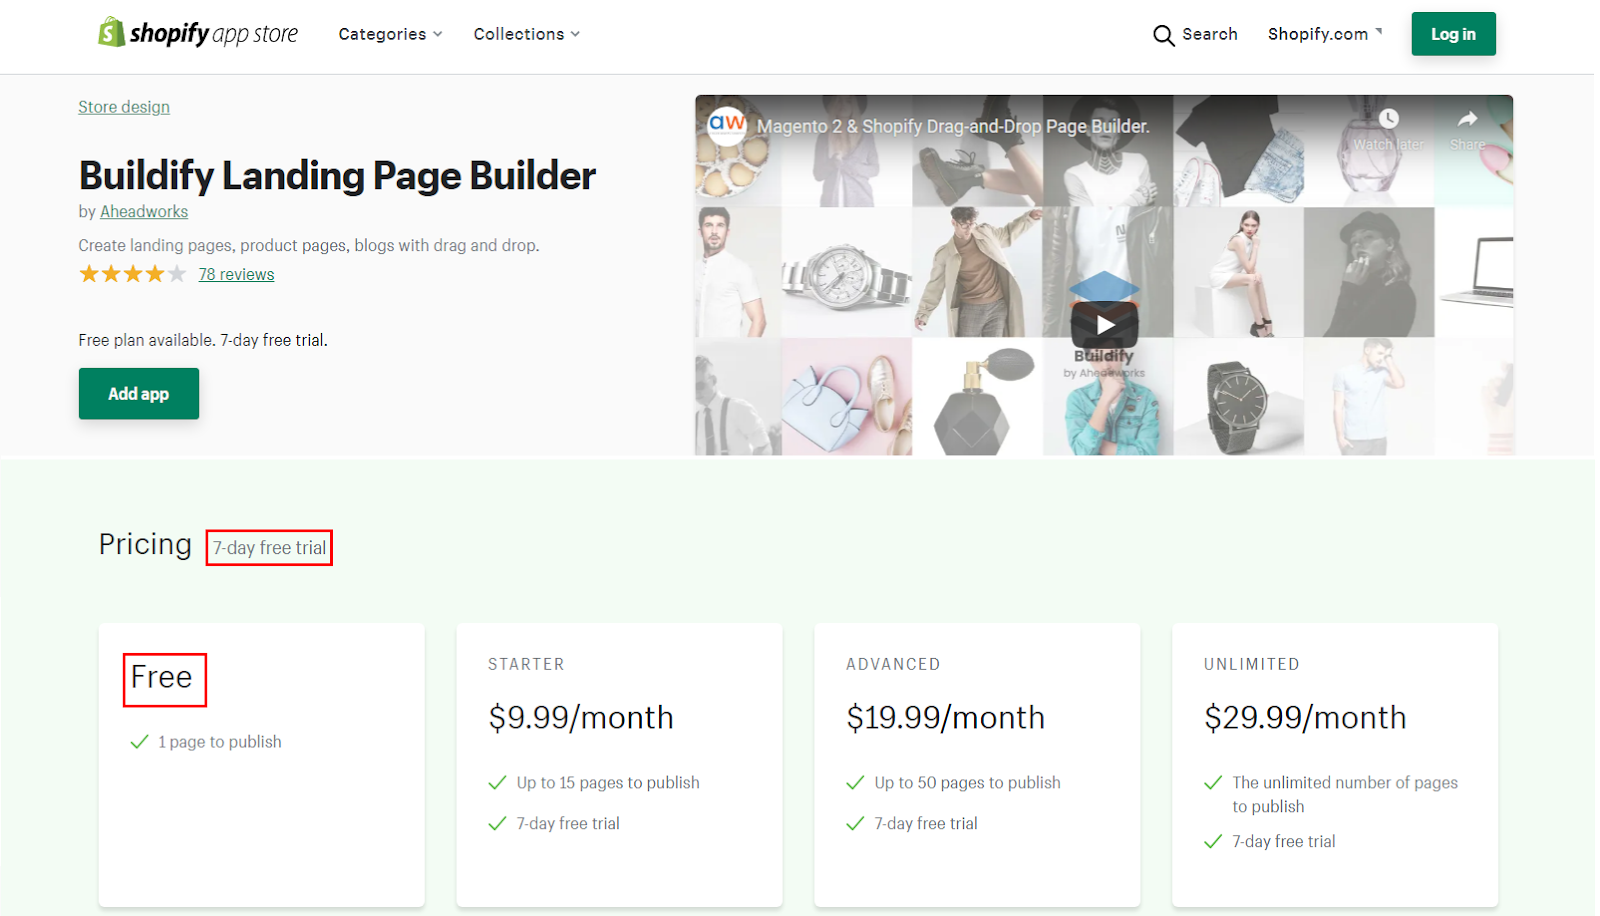 Page builder